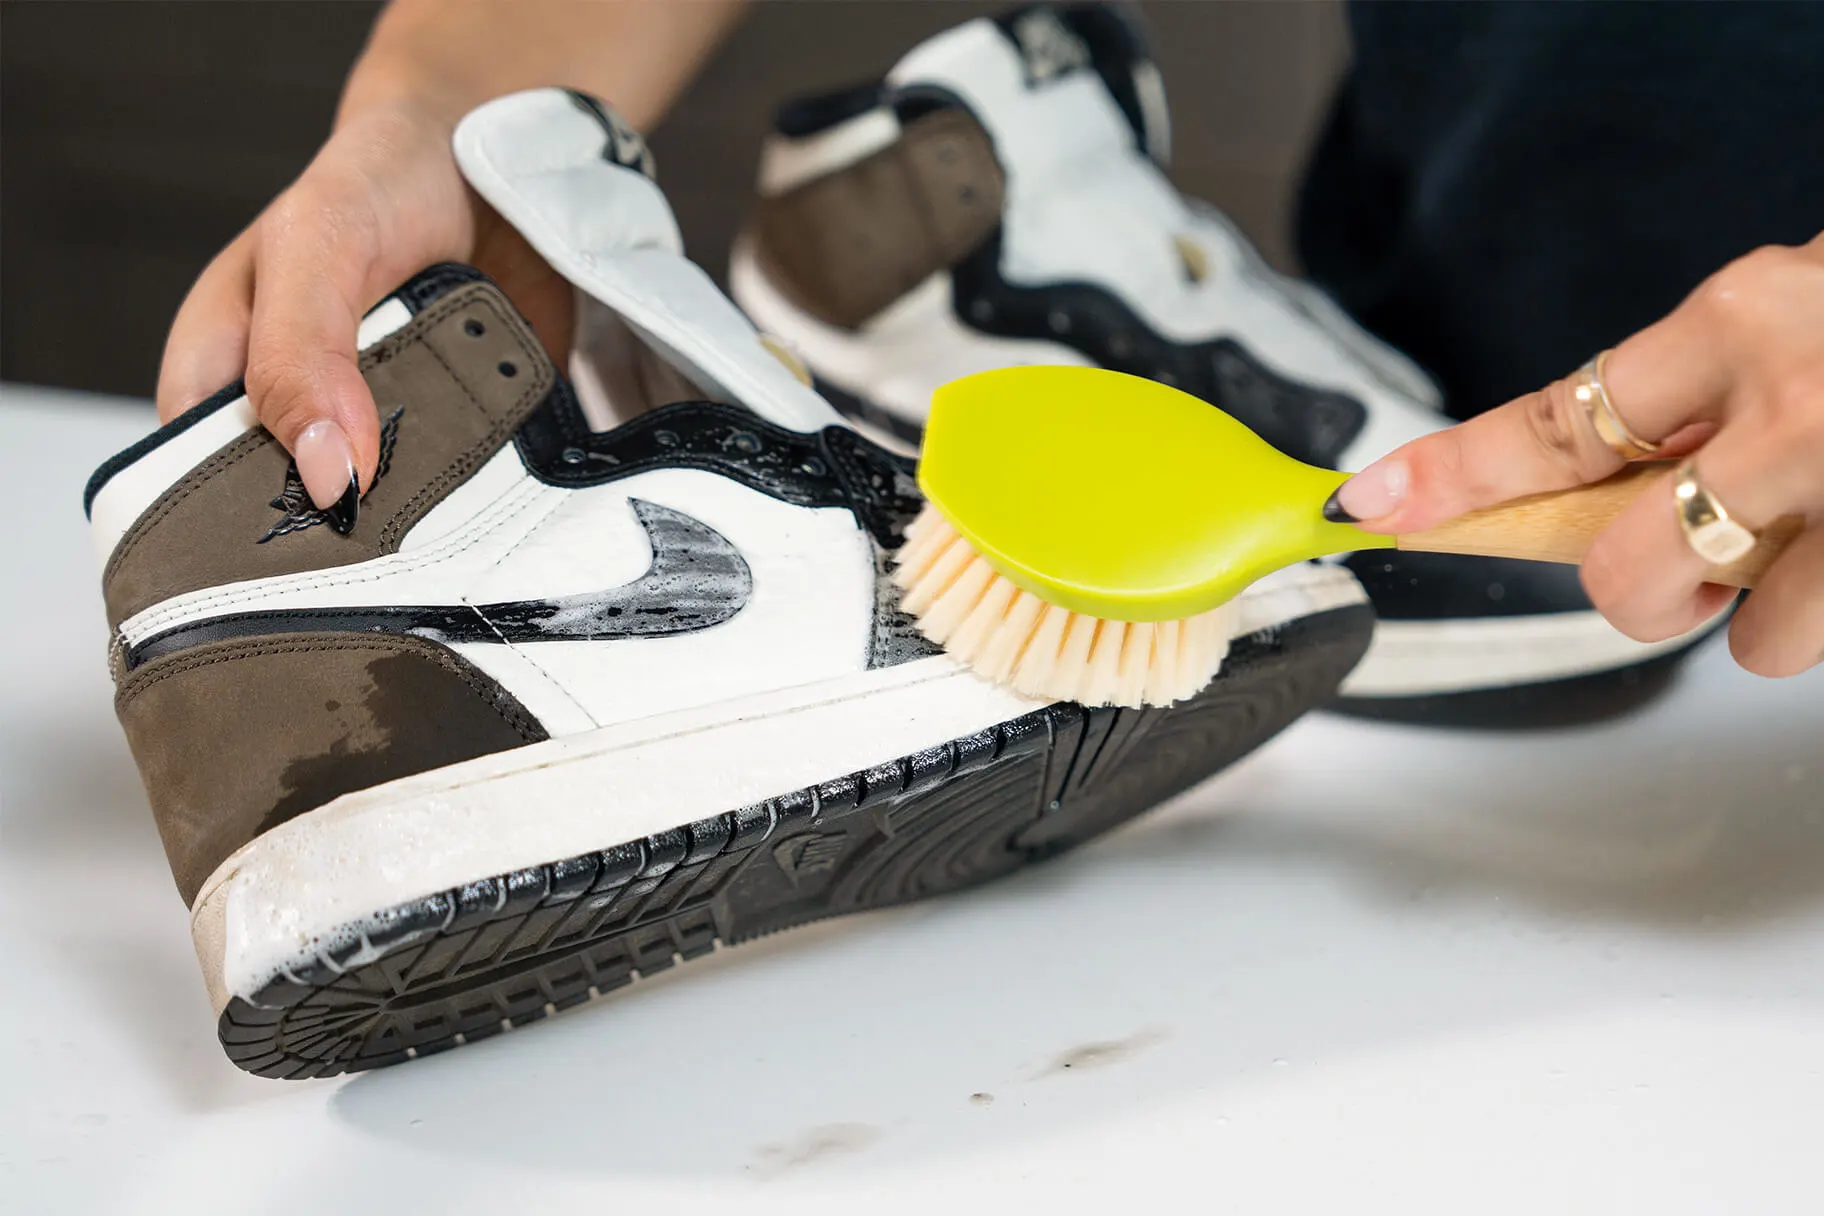 How To Clean Tennis Shoes